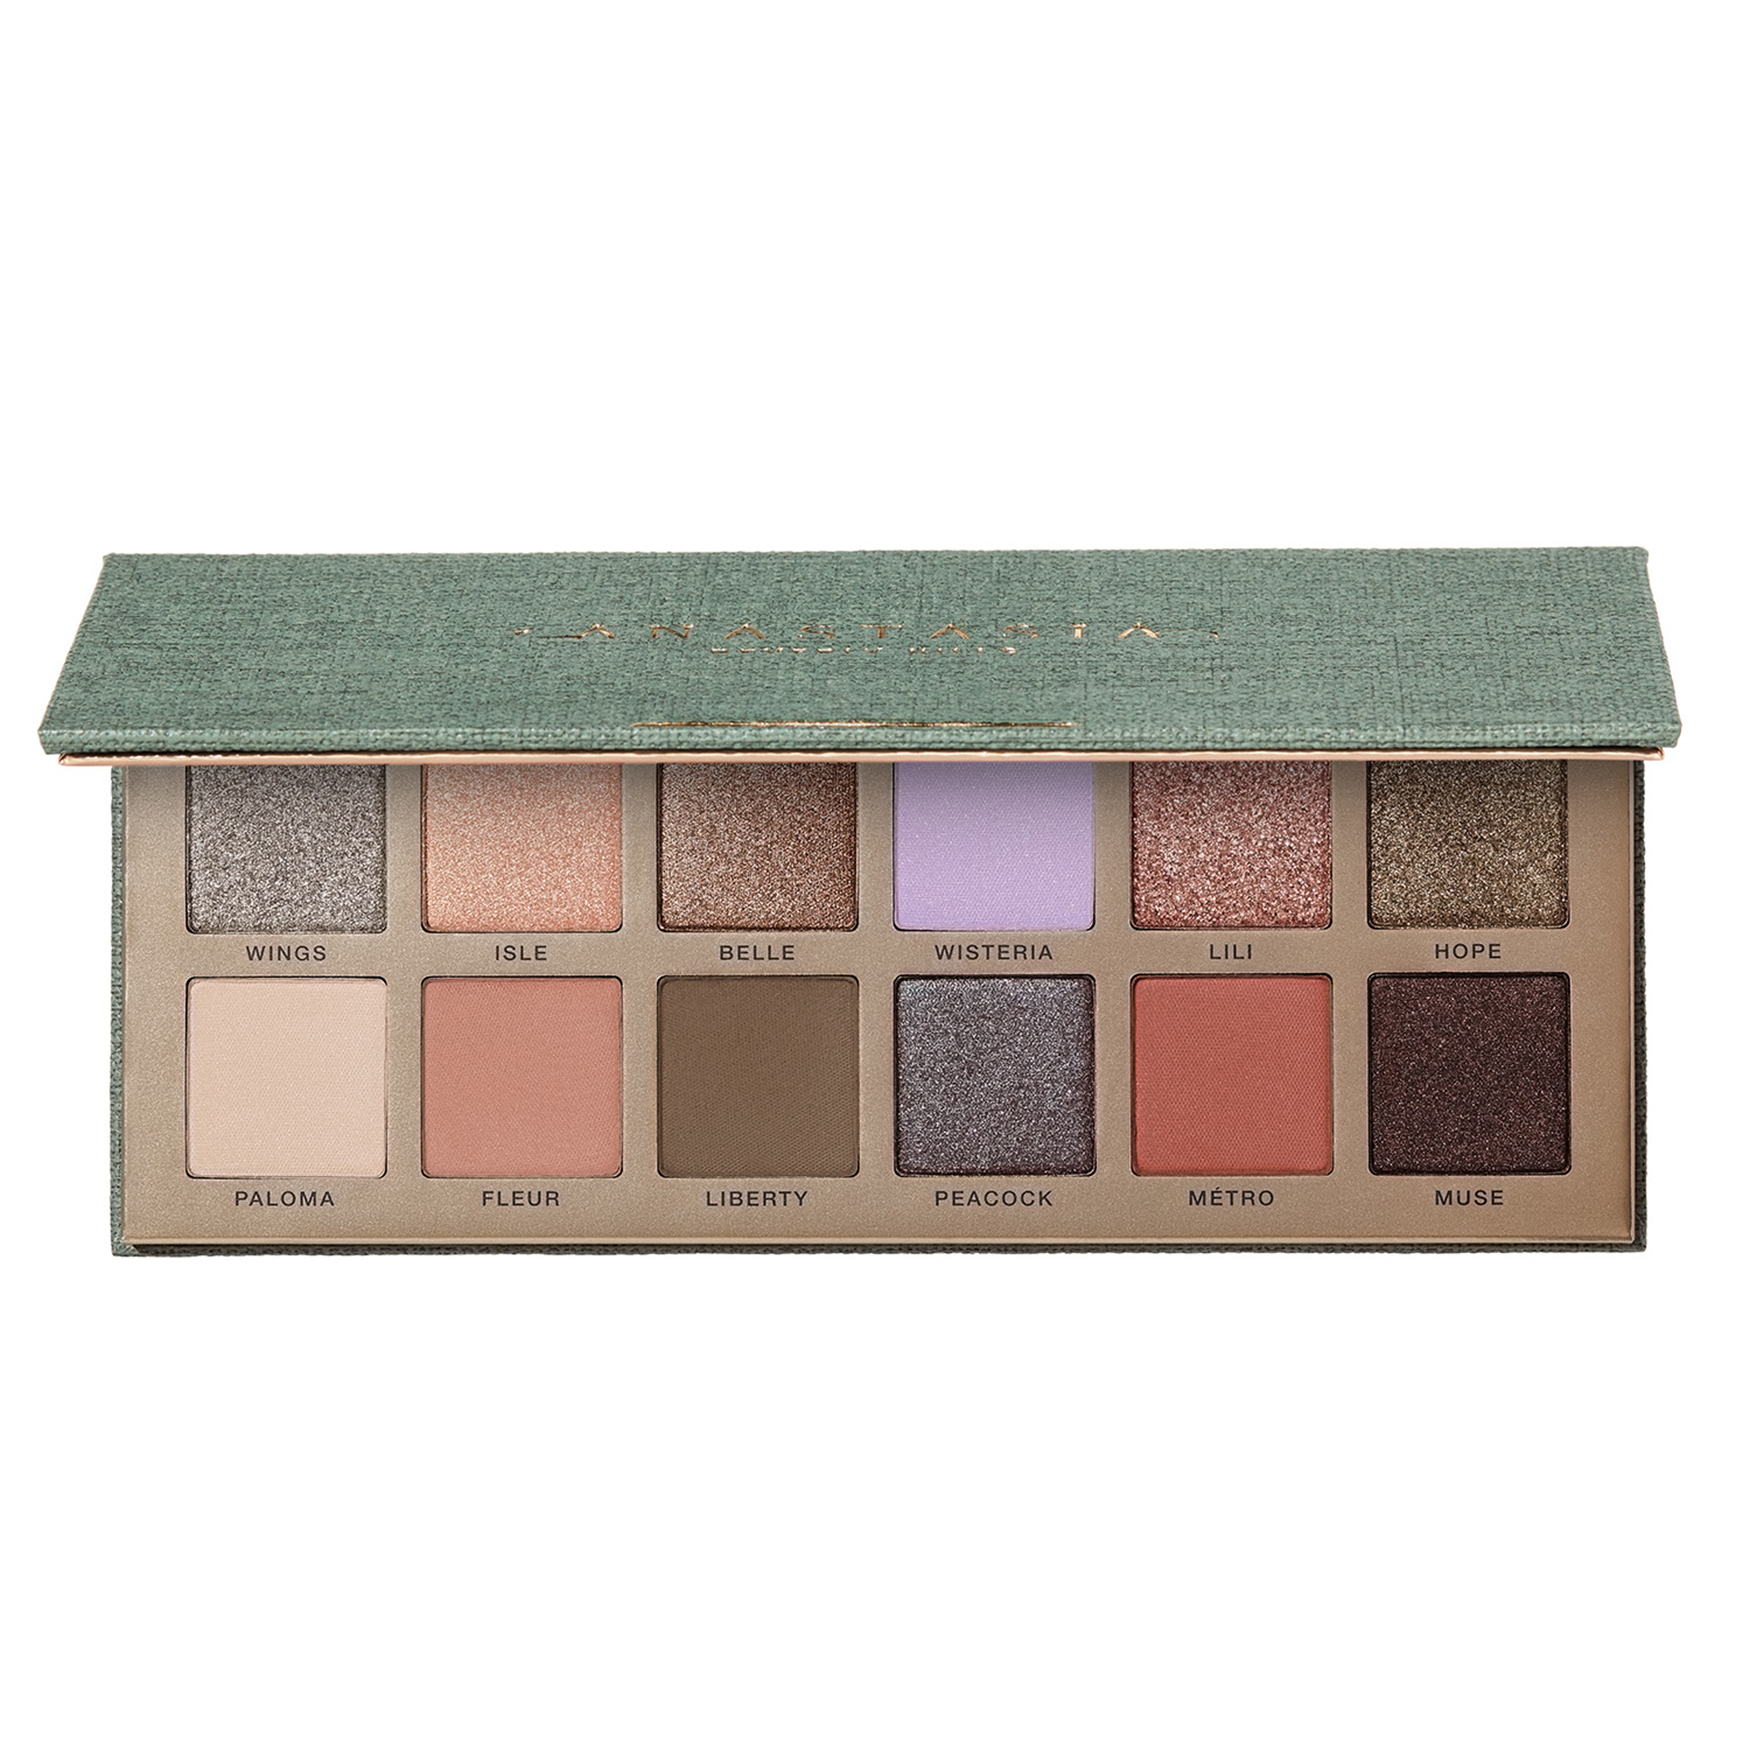 Anastasia Beverly Hills Nouvelle Palette | Space NK